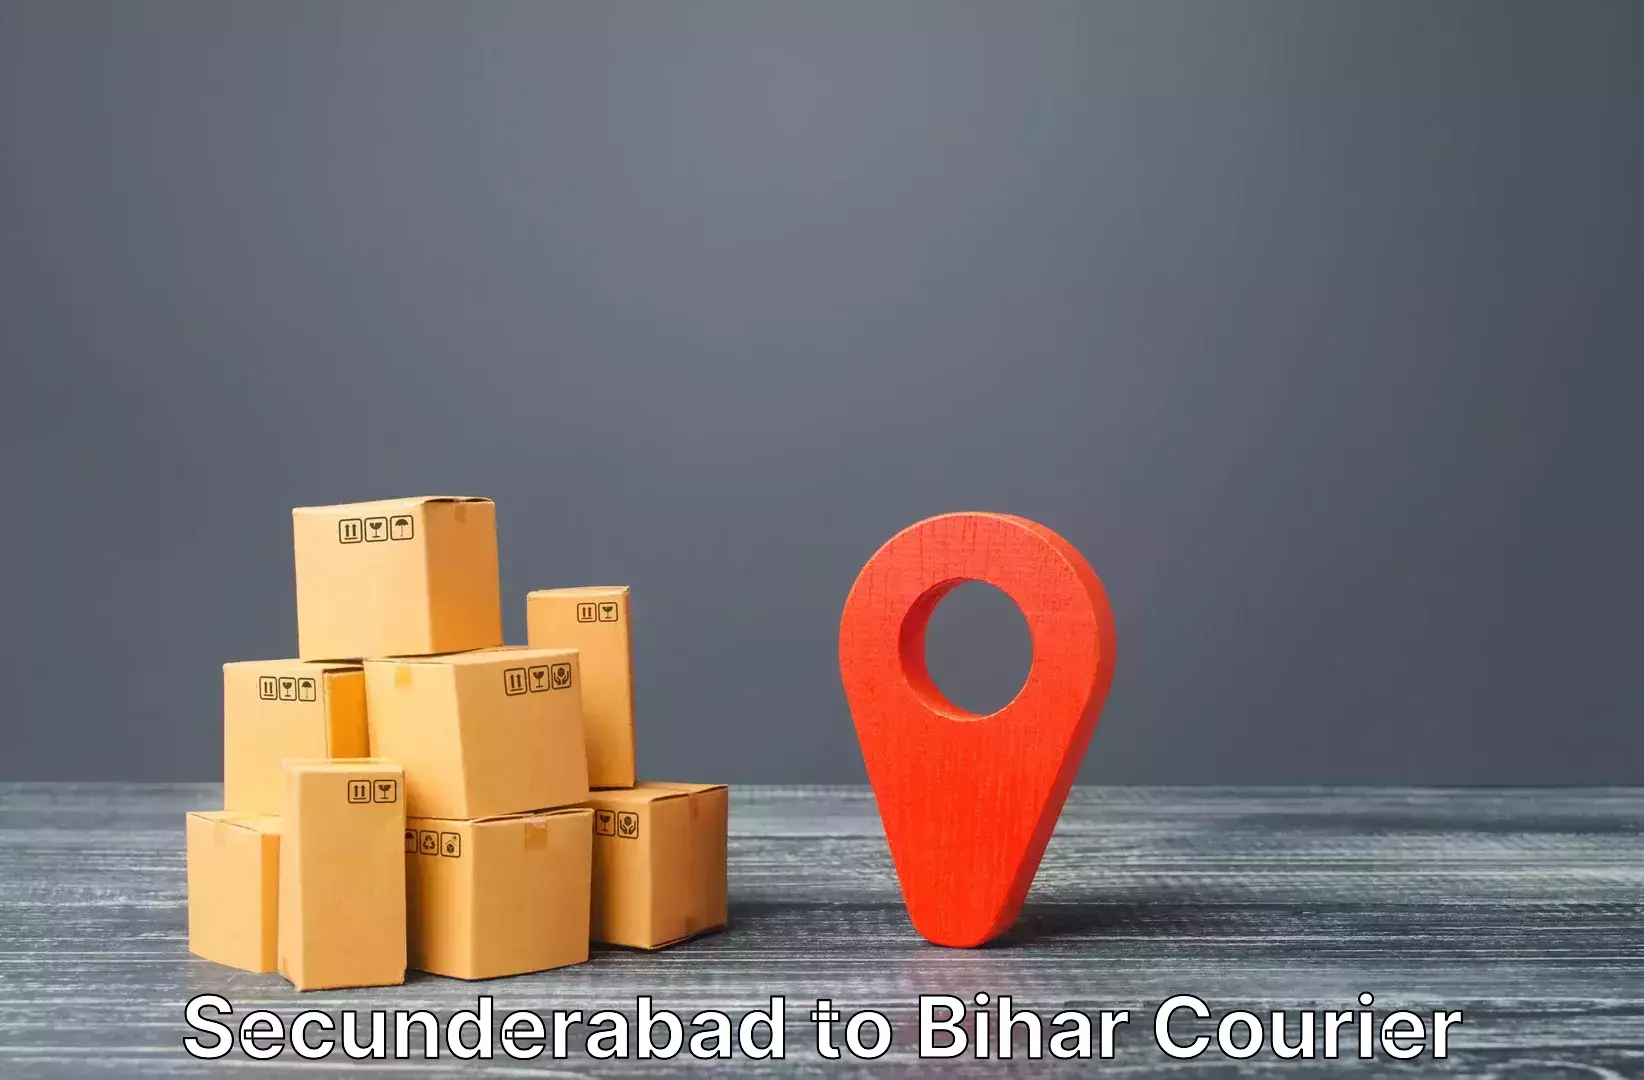 Personal effects shipping in Secunderabad to Goh Aurangabad